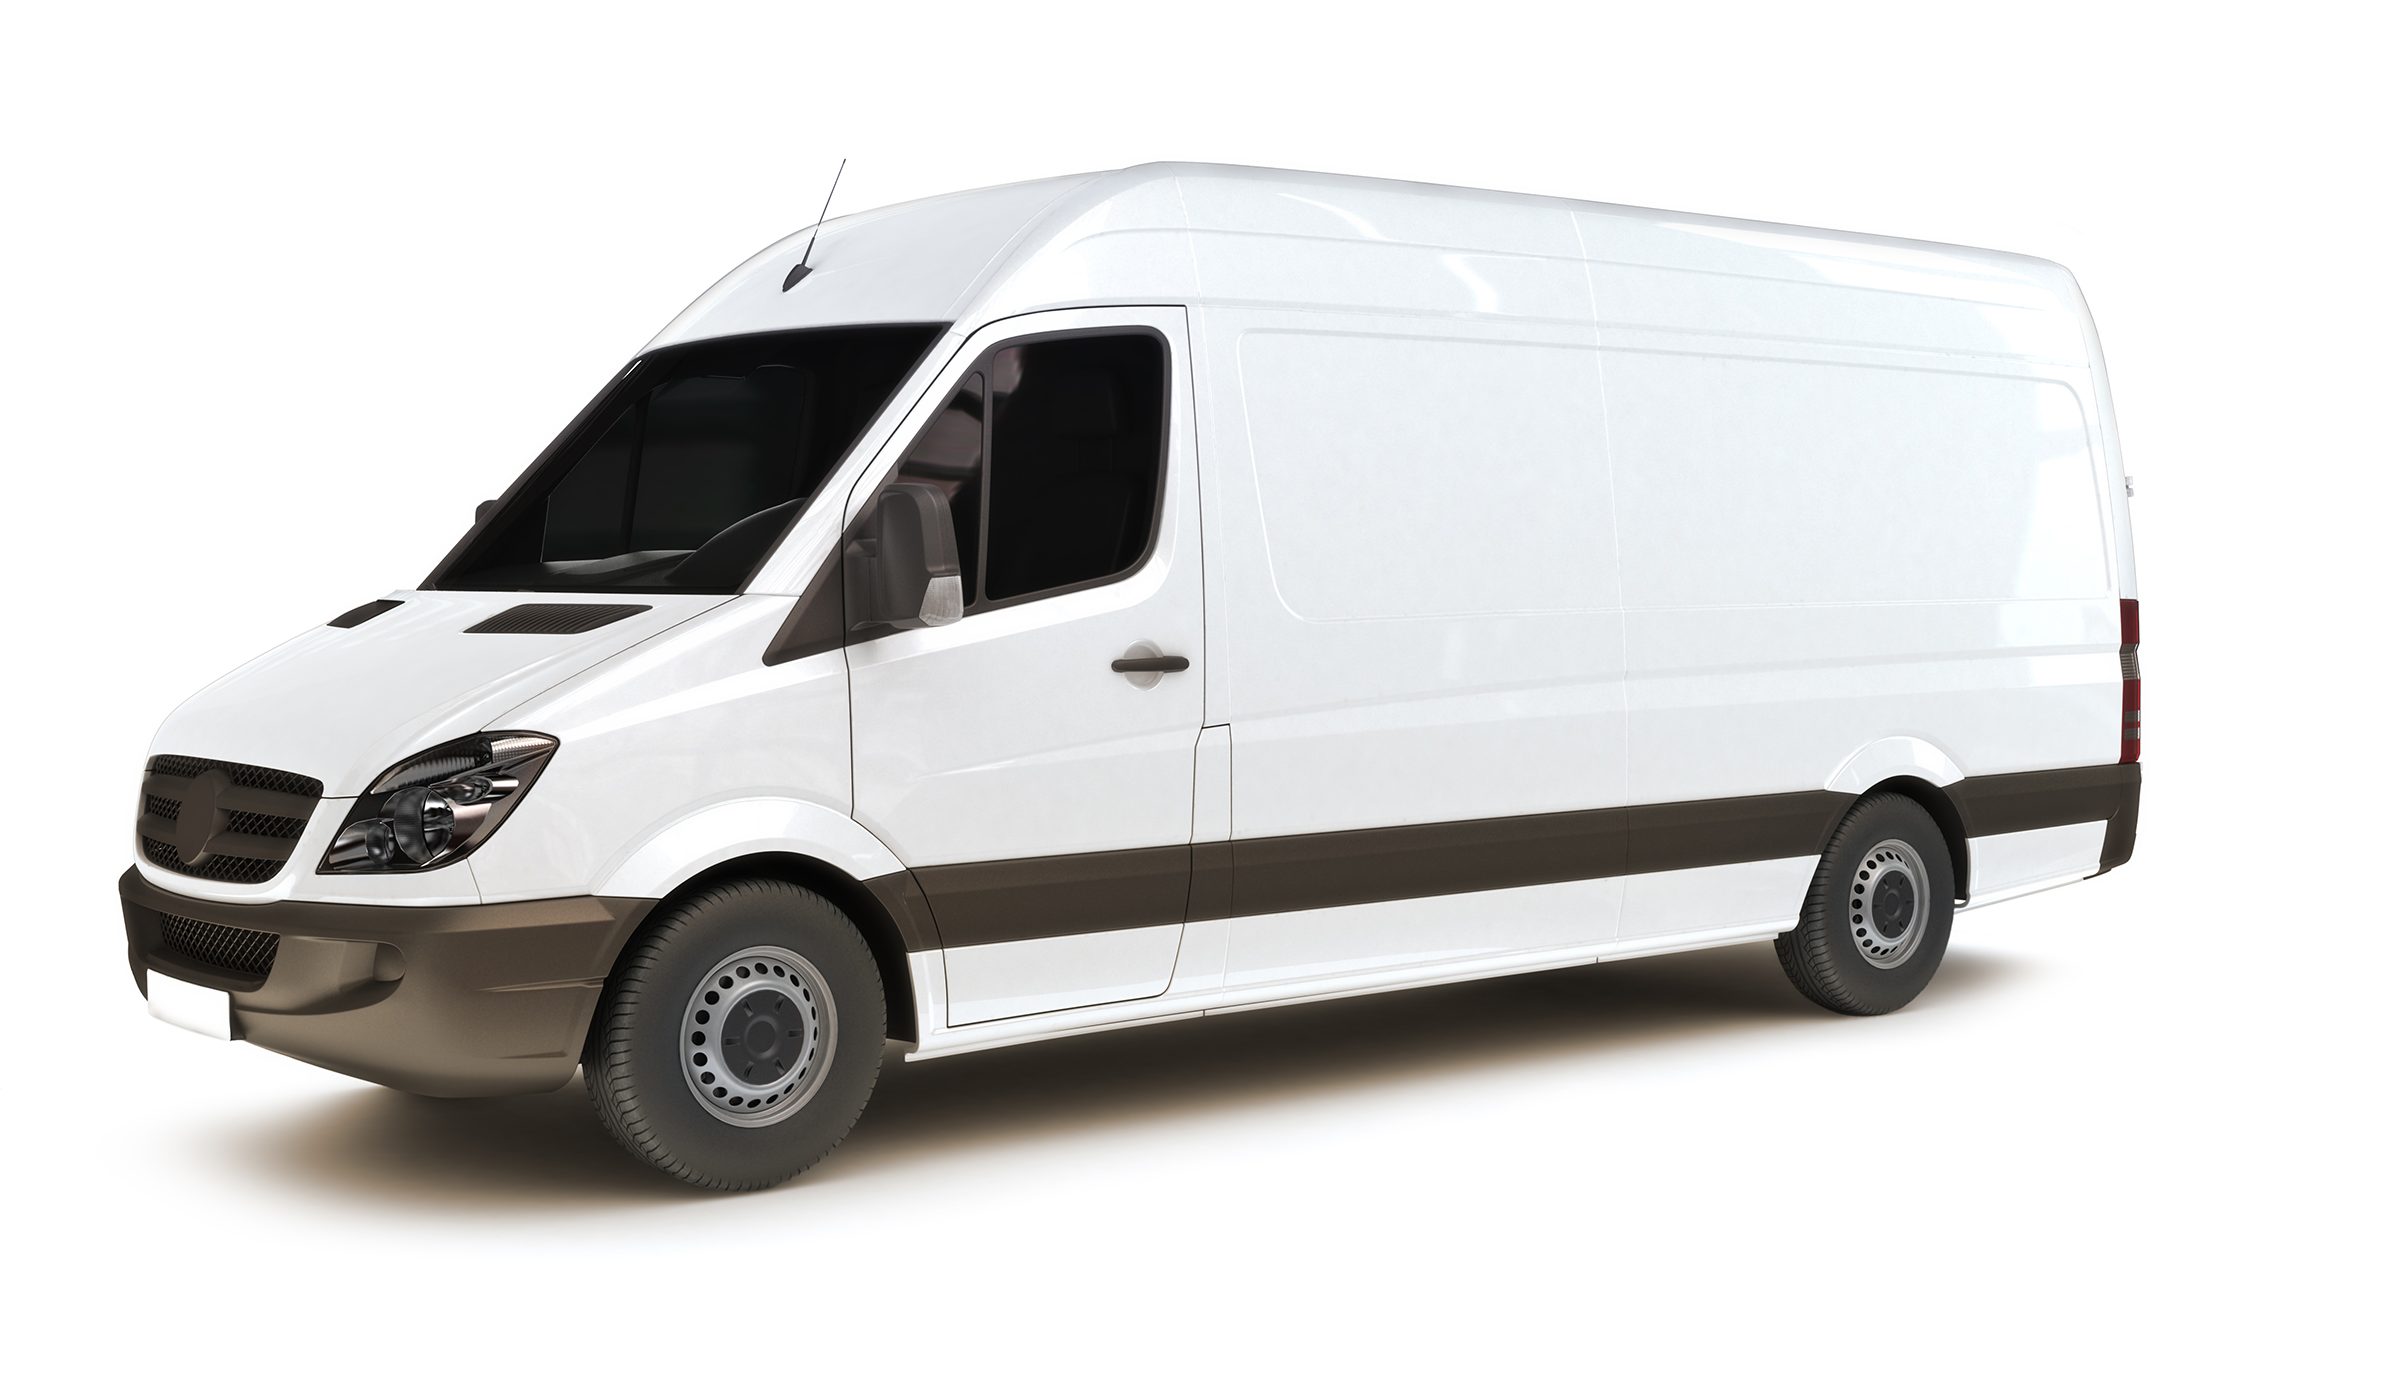 Industrial van on a white background